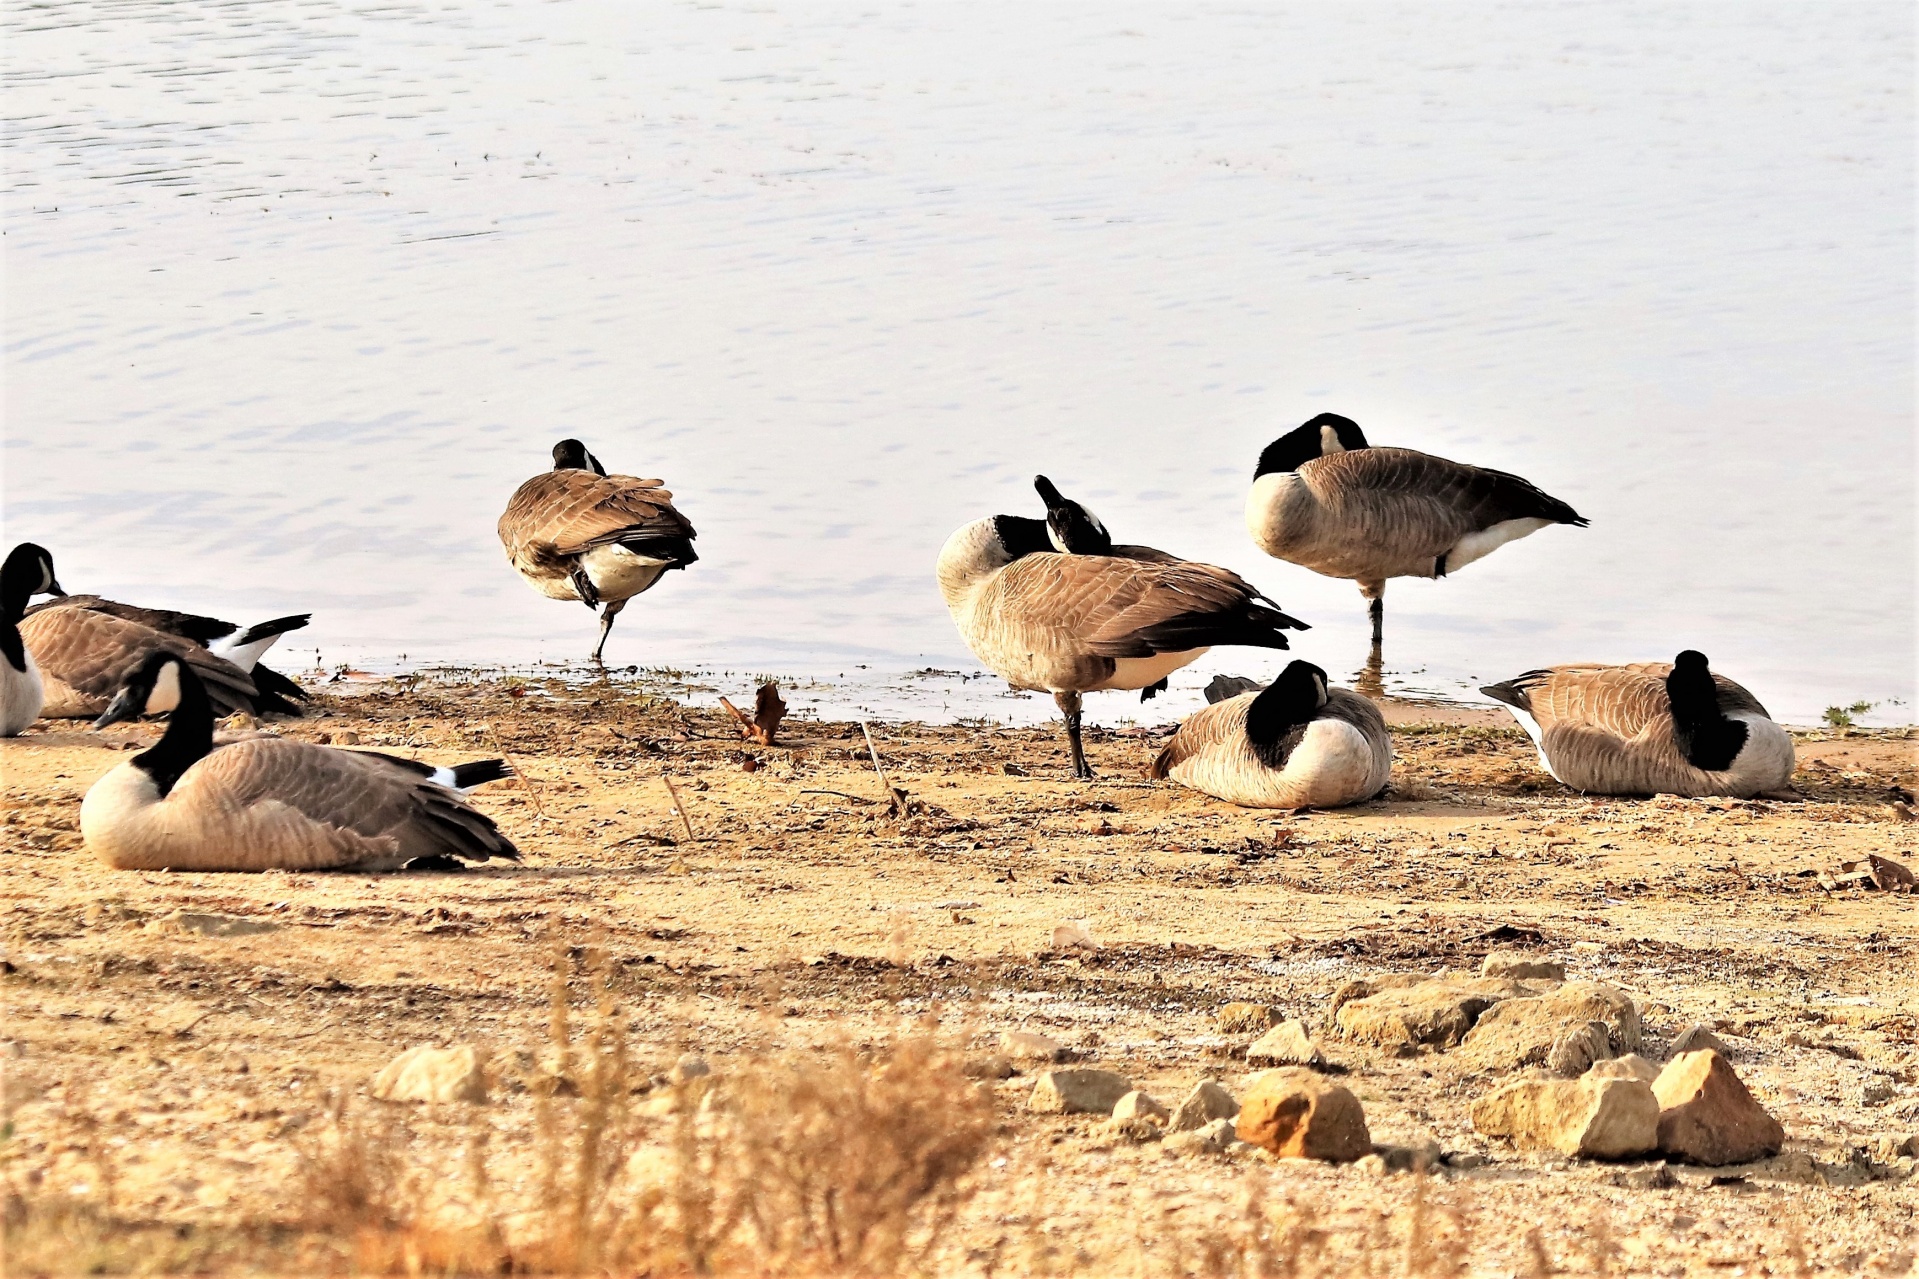 A group of Canada geese on the beach of a lake, with some lying down and three standing on one foot, looking like ballerinas.